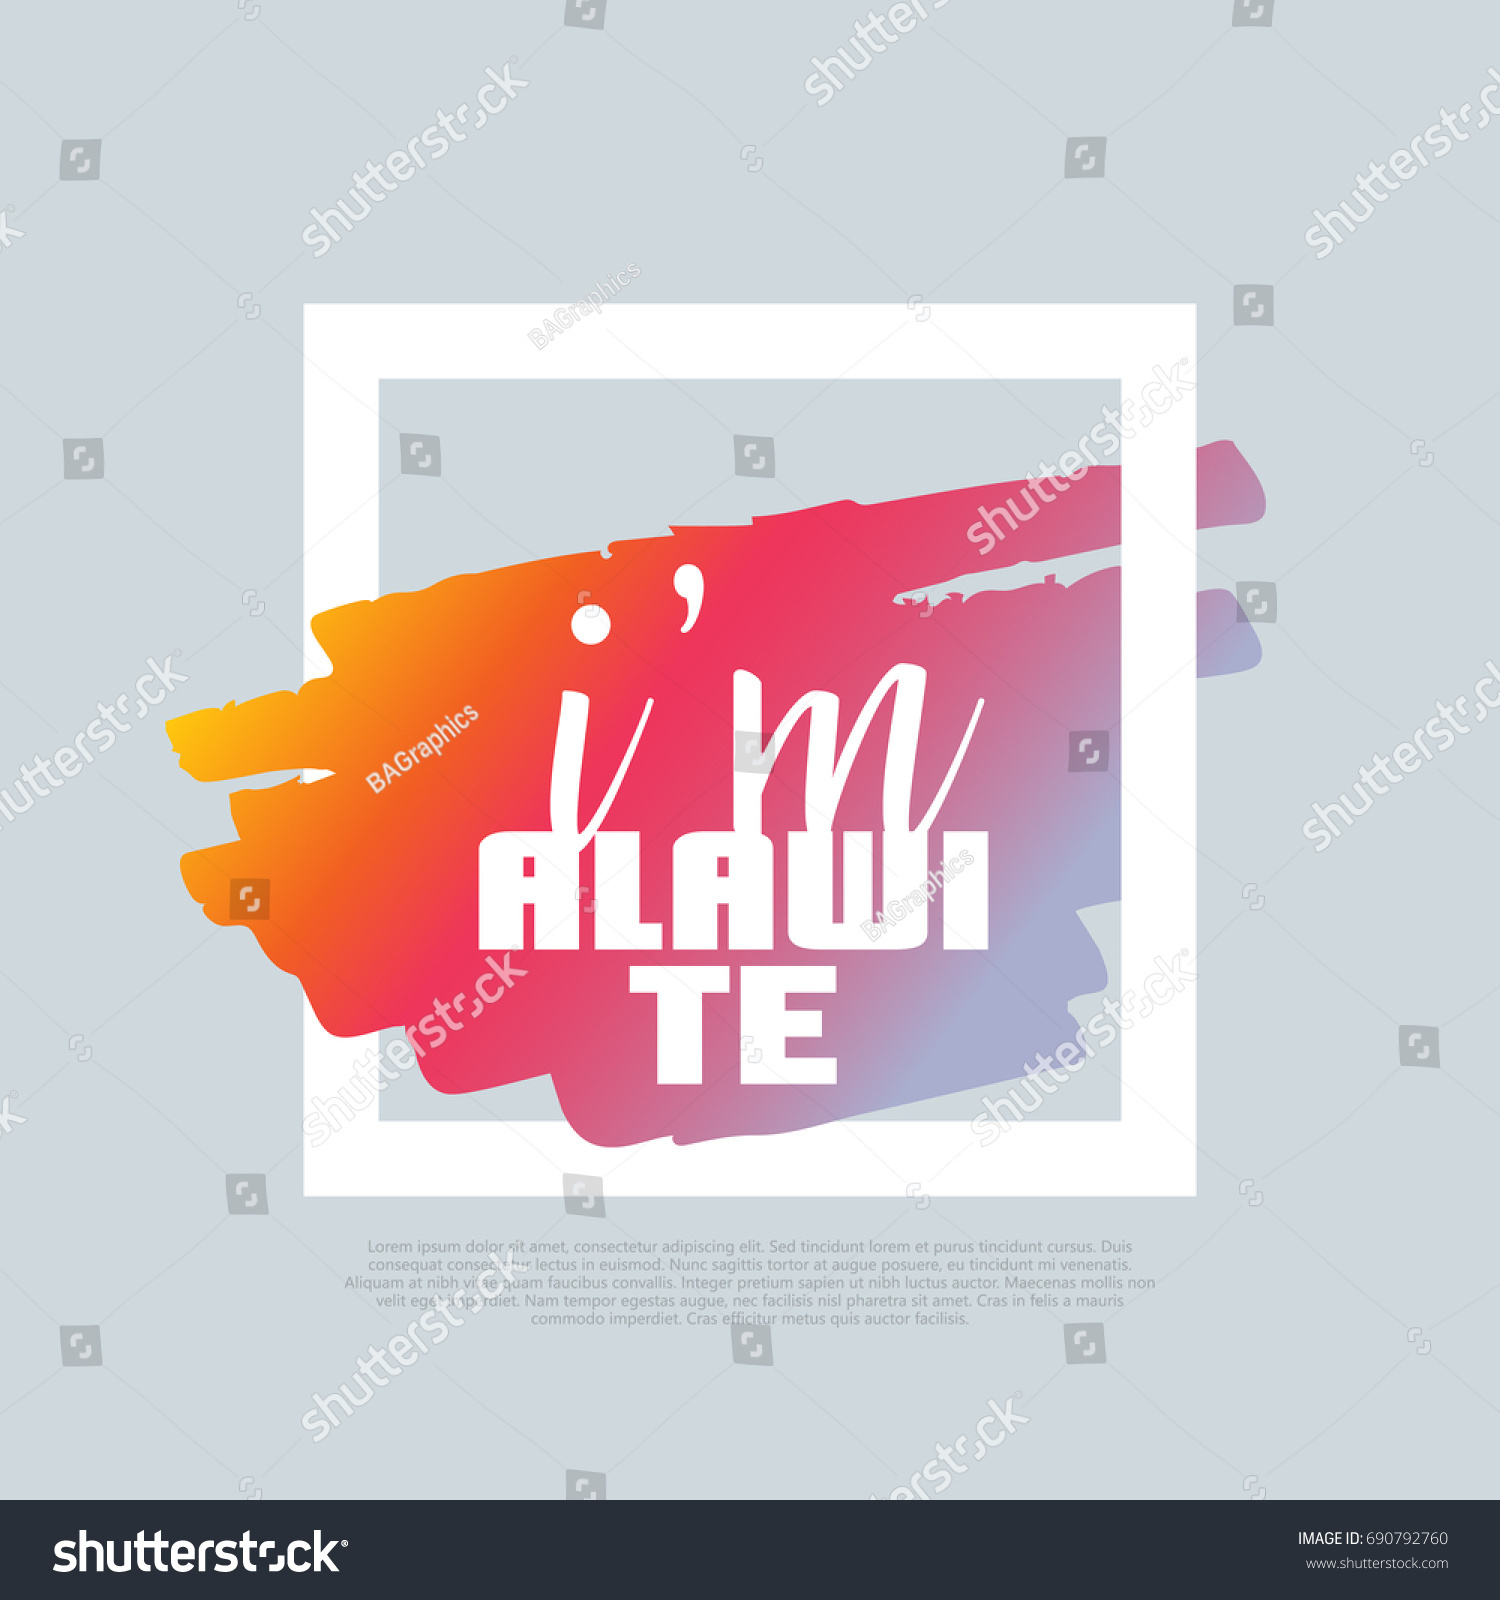 SVG of I'm an Alawite. Vector clip-art template, poster design. Motto, label, text. Compatible wtih PNG, JPG, AI, CDR, SVG, PDF and EPS. svg